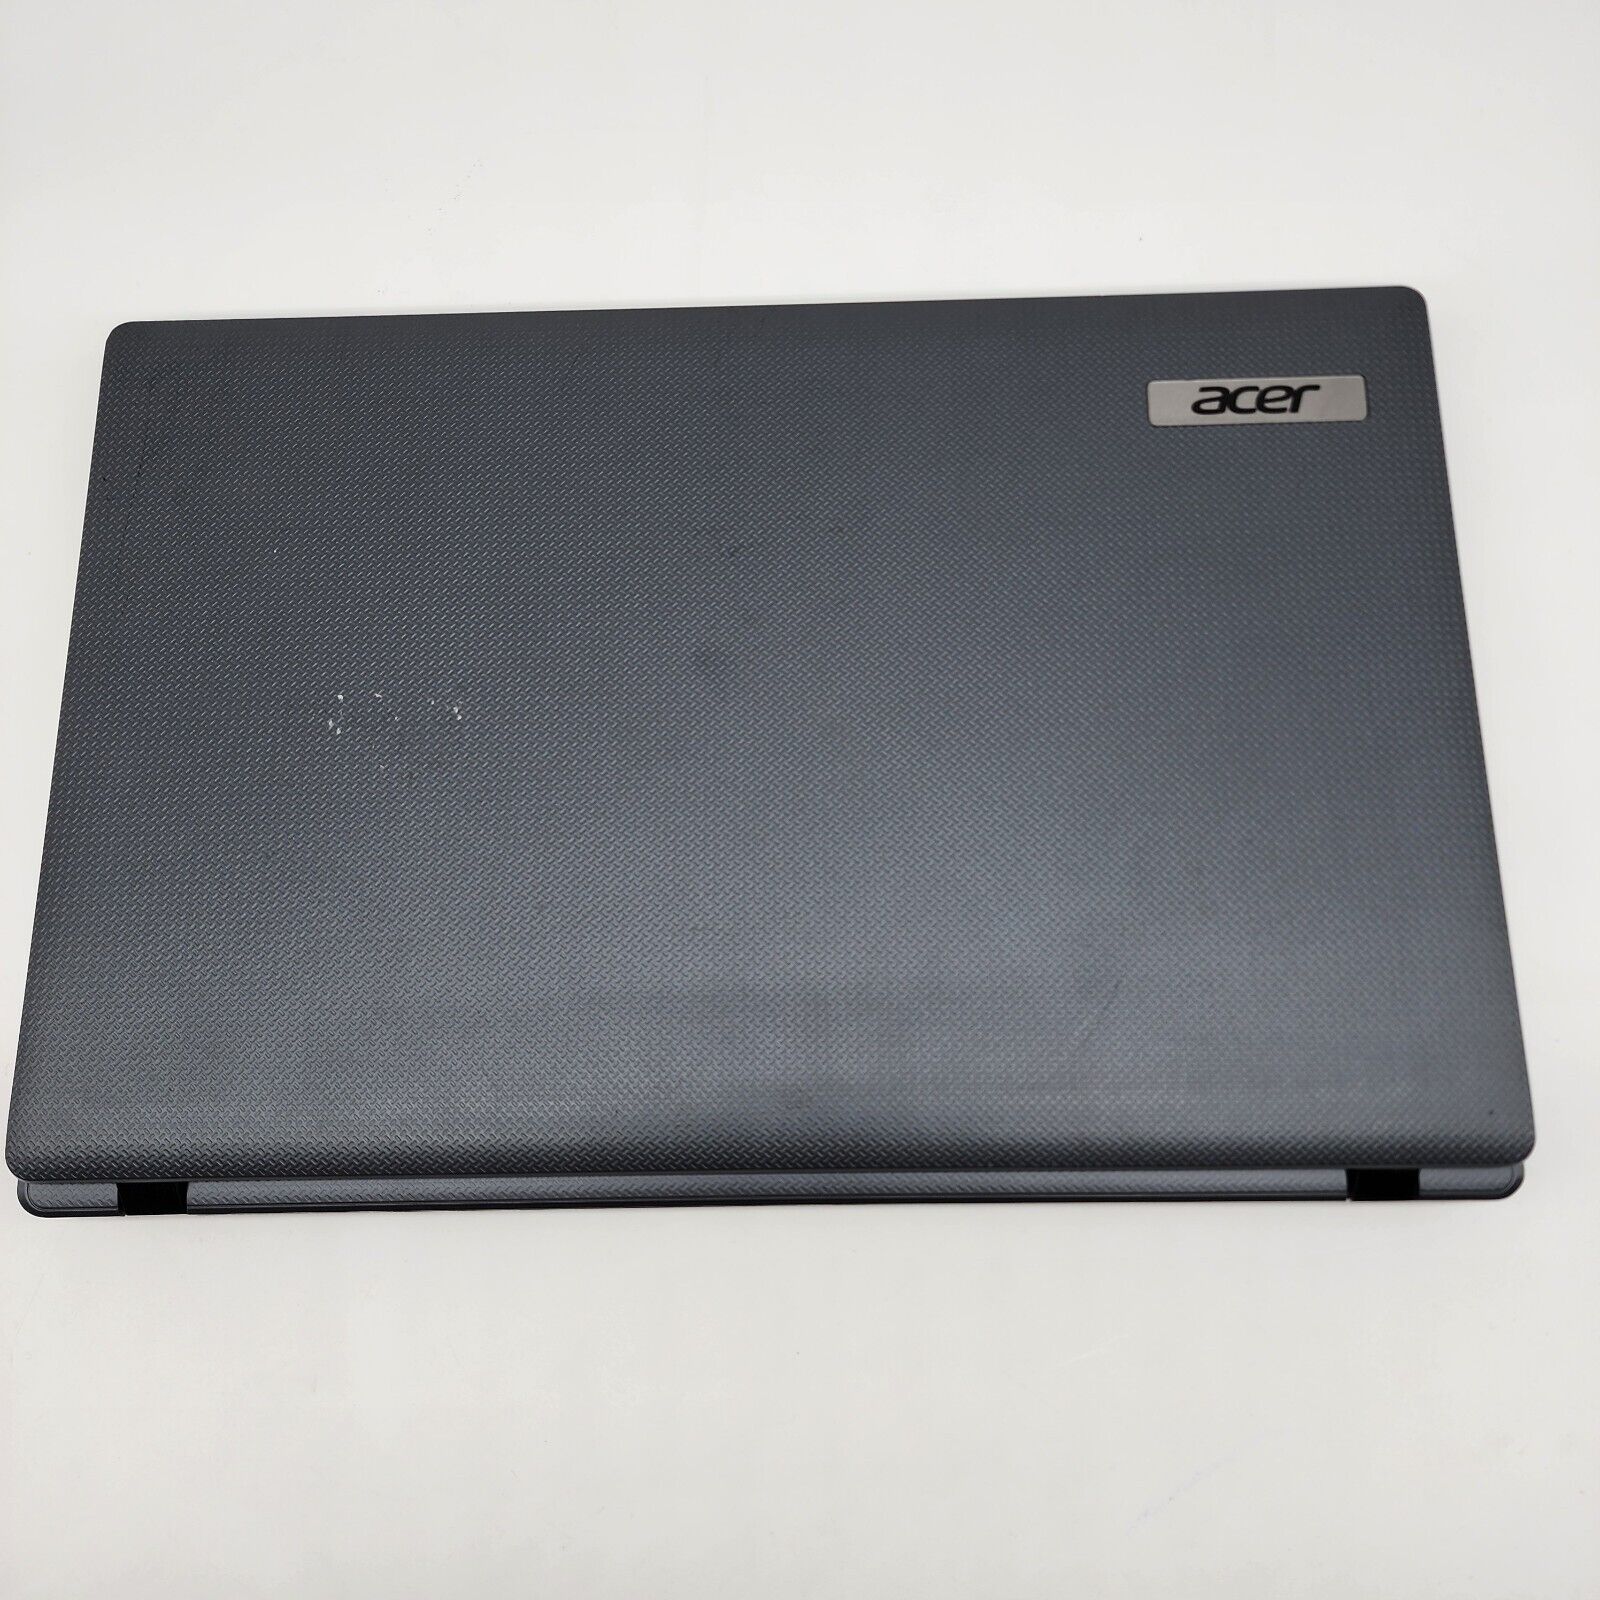 Acer Aspire 5733 I5 Intel Core 320hdd 15.6 Screen Untested 